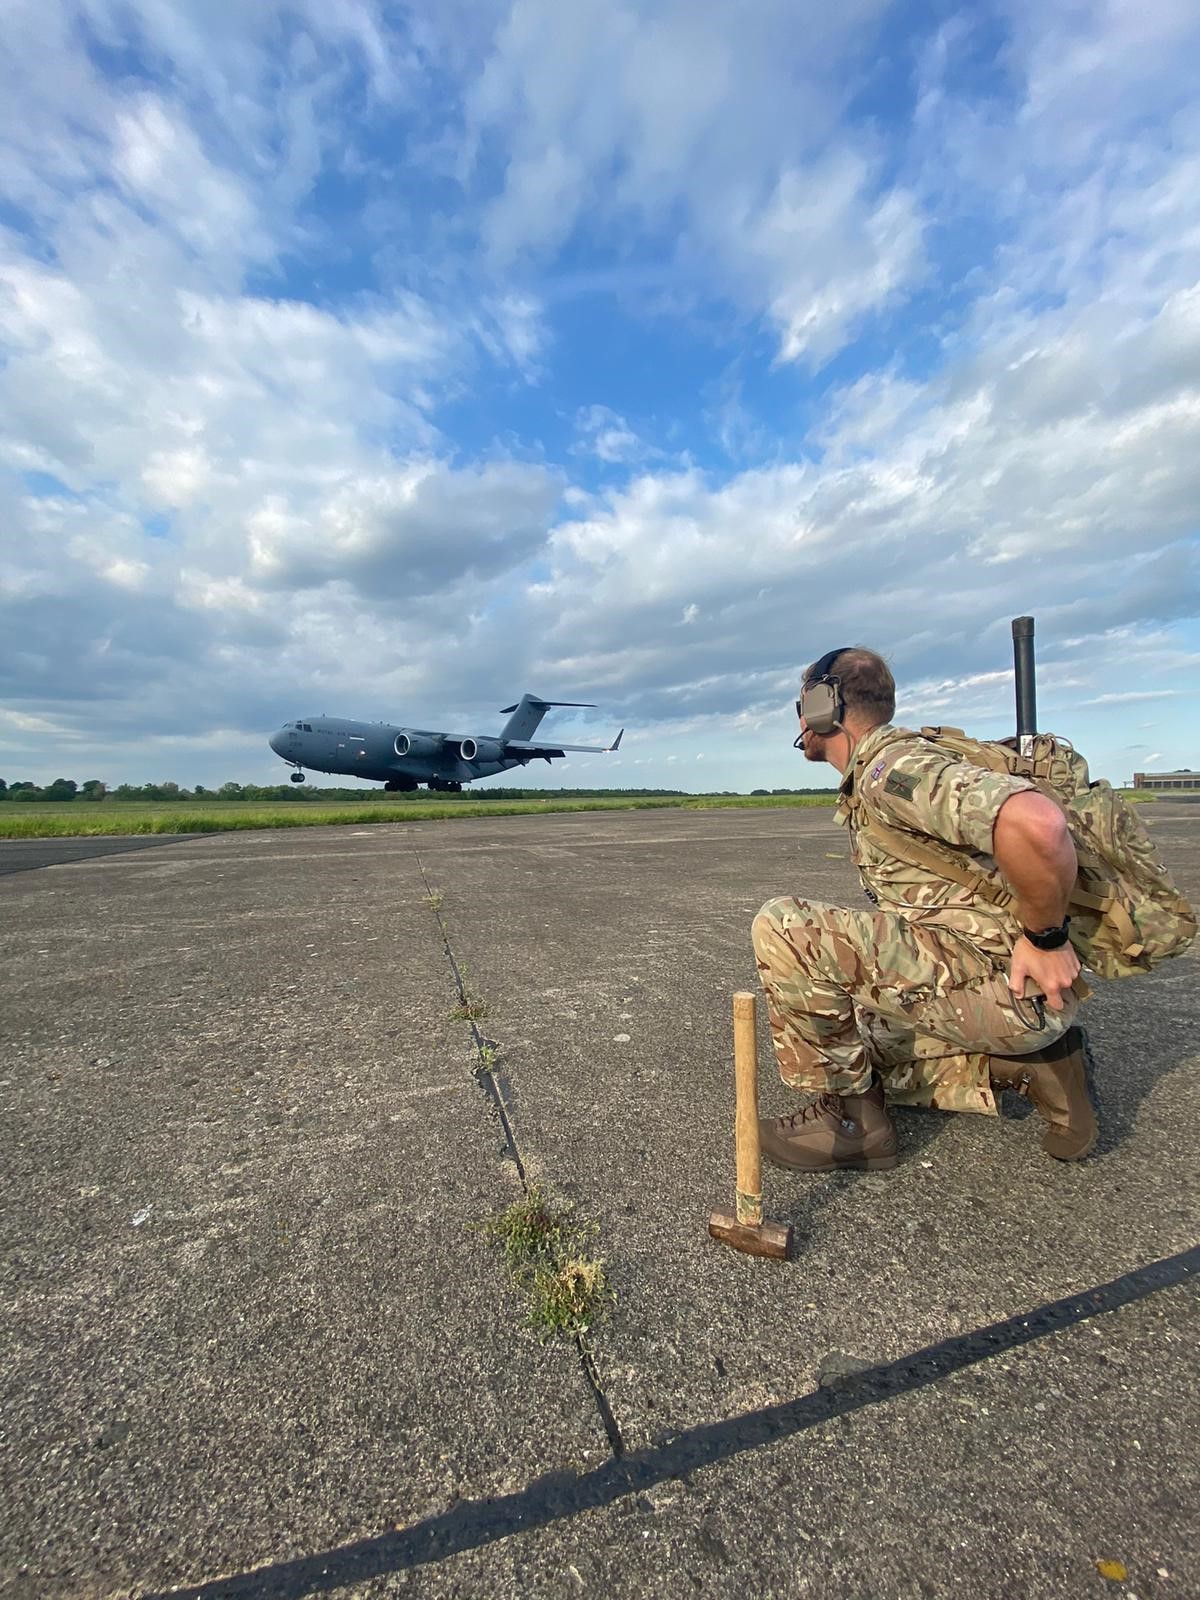 The Air Mobility Force have been developing the skillsets of frontline Atlas A400M crews on Exercise Venture Spirit in Scotland.